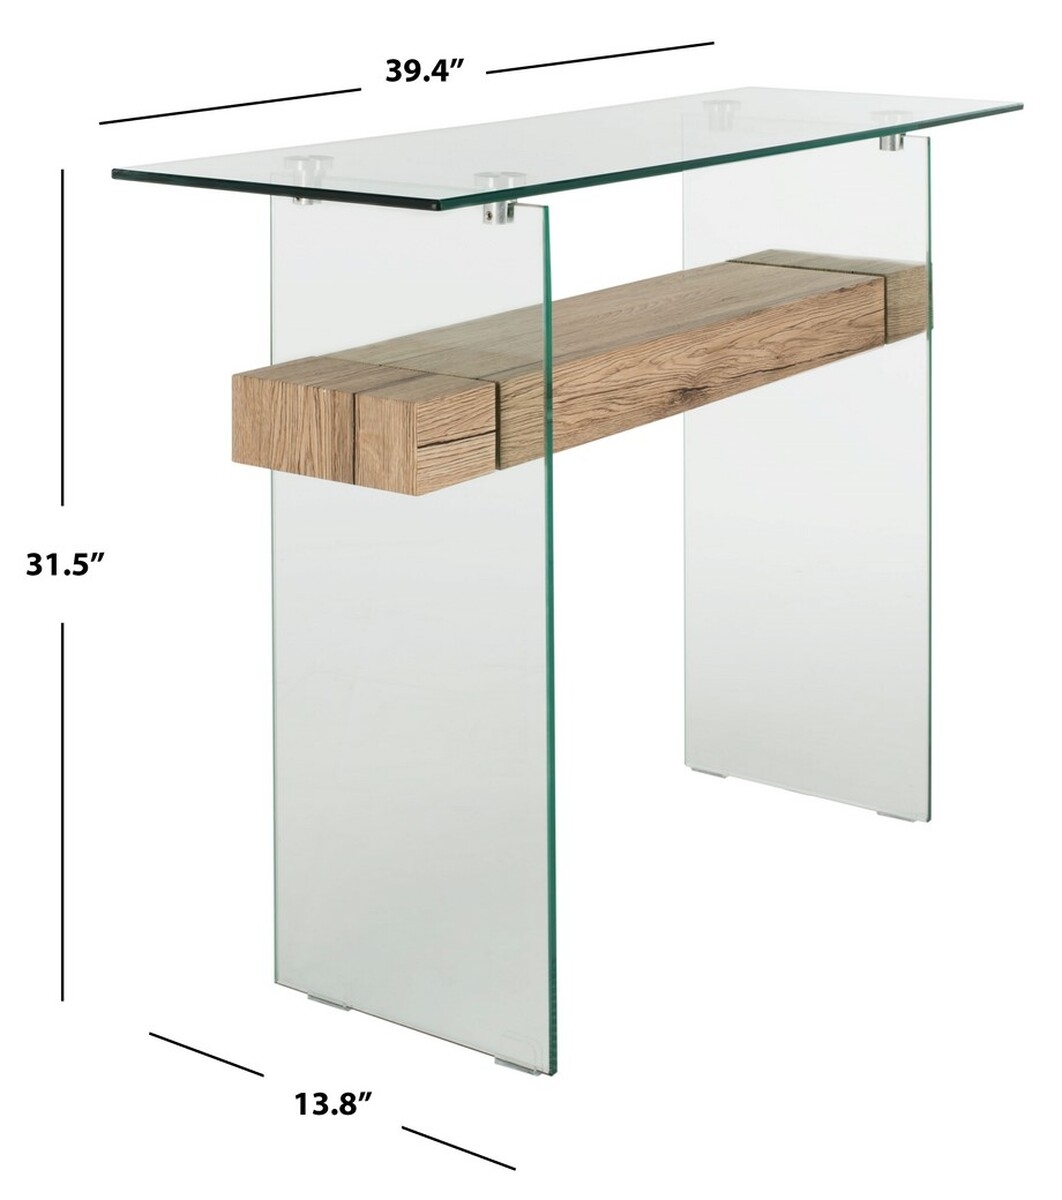 Kayley Console Table - Natural/Glass - Arlo Home - Image 4